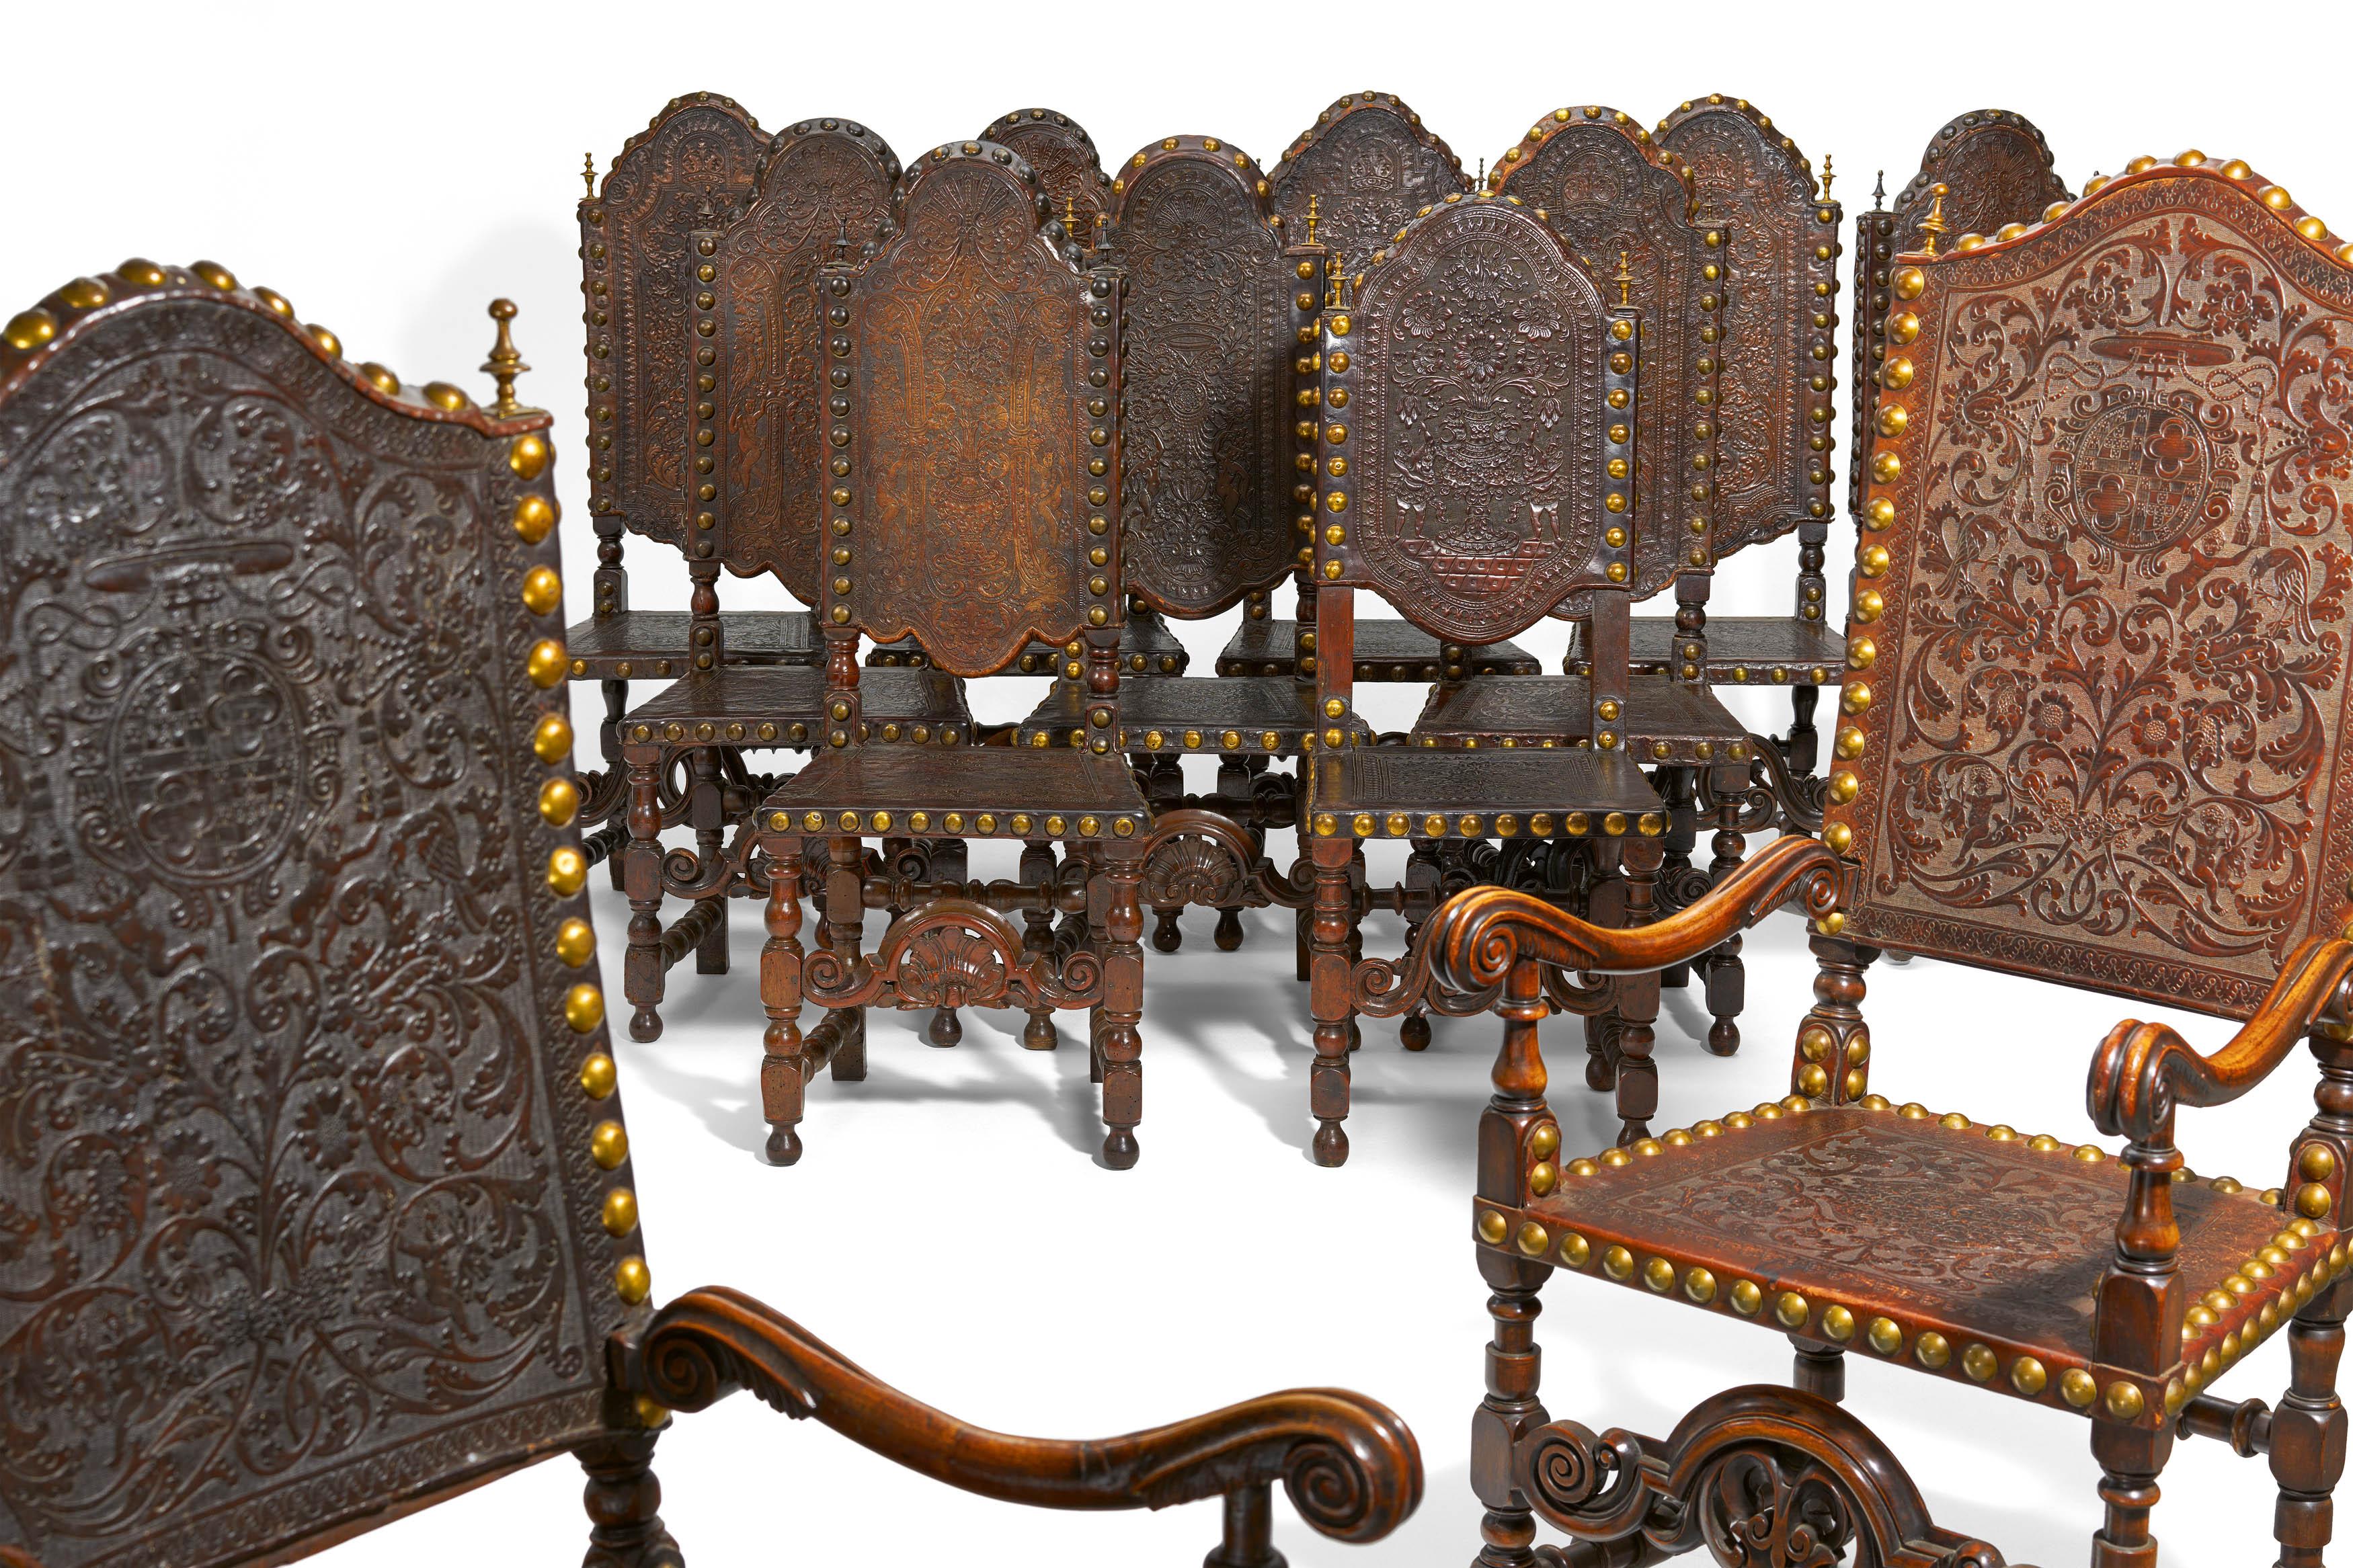 Set of ten chairs and two armchairs in the style of the 17th century